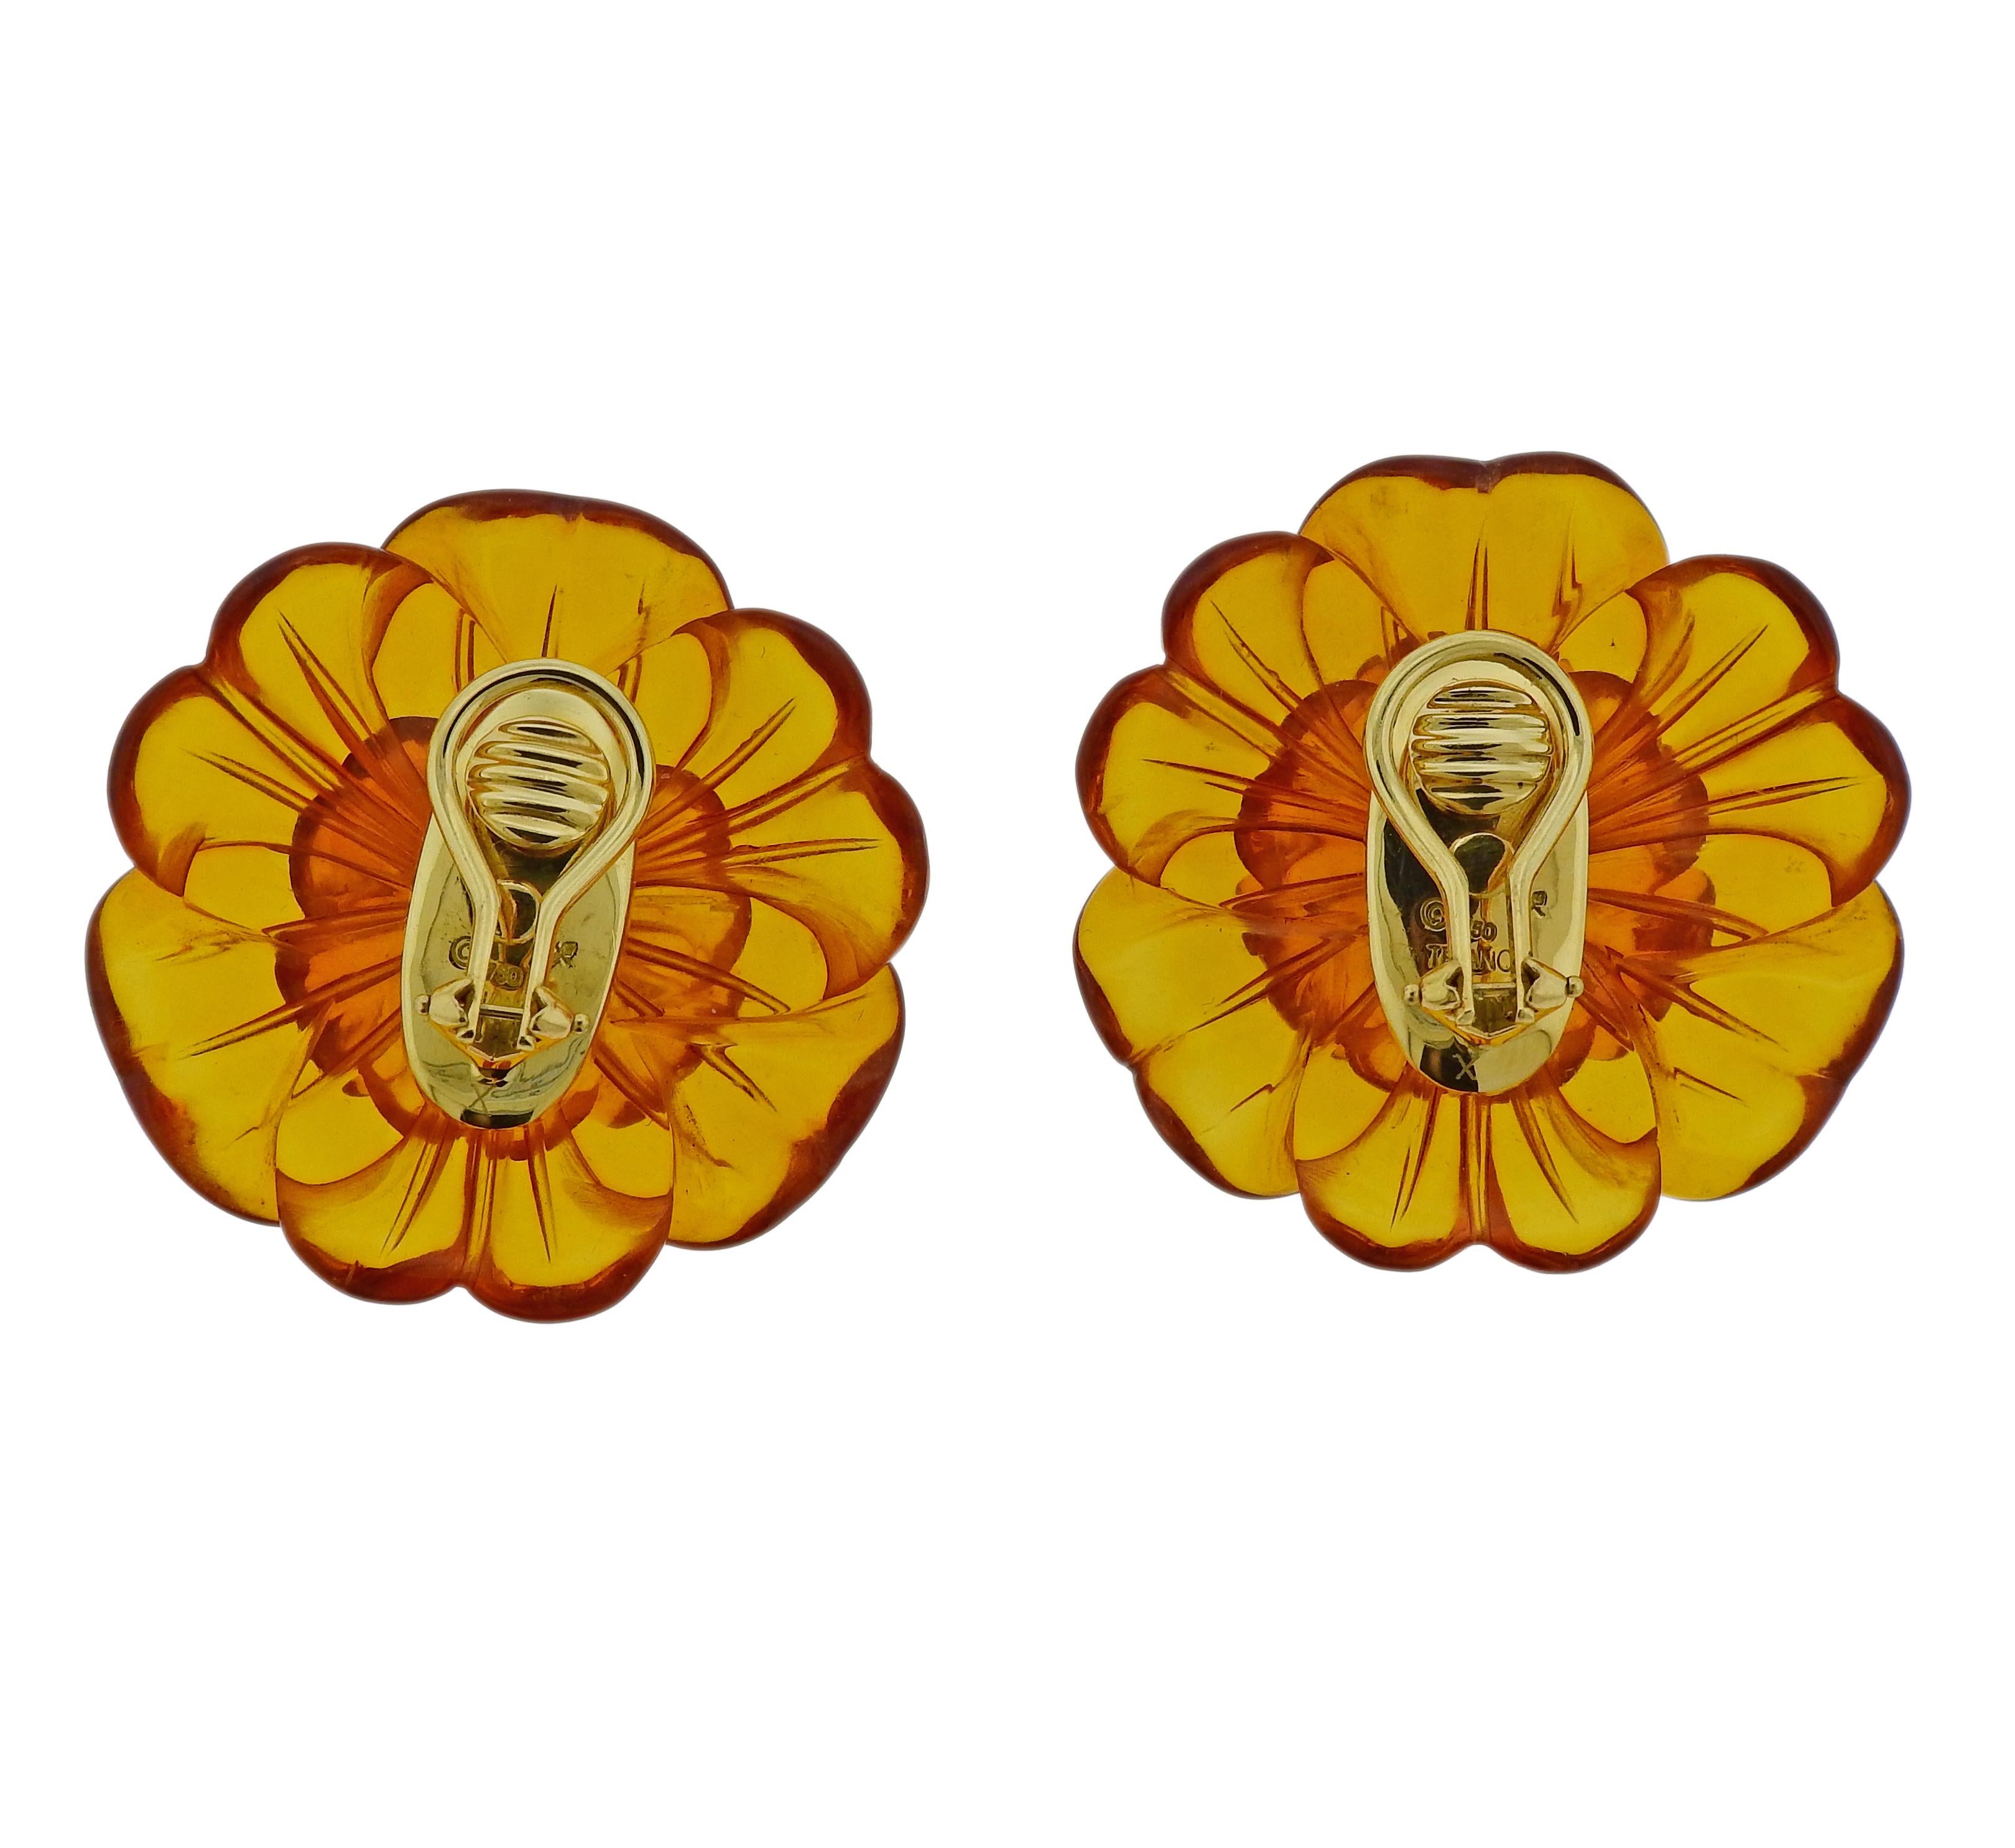 Pair of large flower earrings by Trianon, featuring amber petals, diamonds and citrine in the center.  Retail $4070. Earrings are 35mm in diameter, weigh 13.8 grams. Marked: Trianon, 750.  